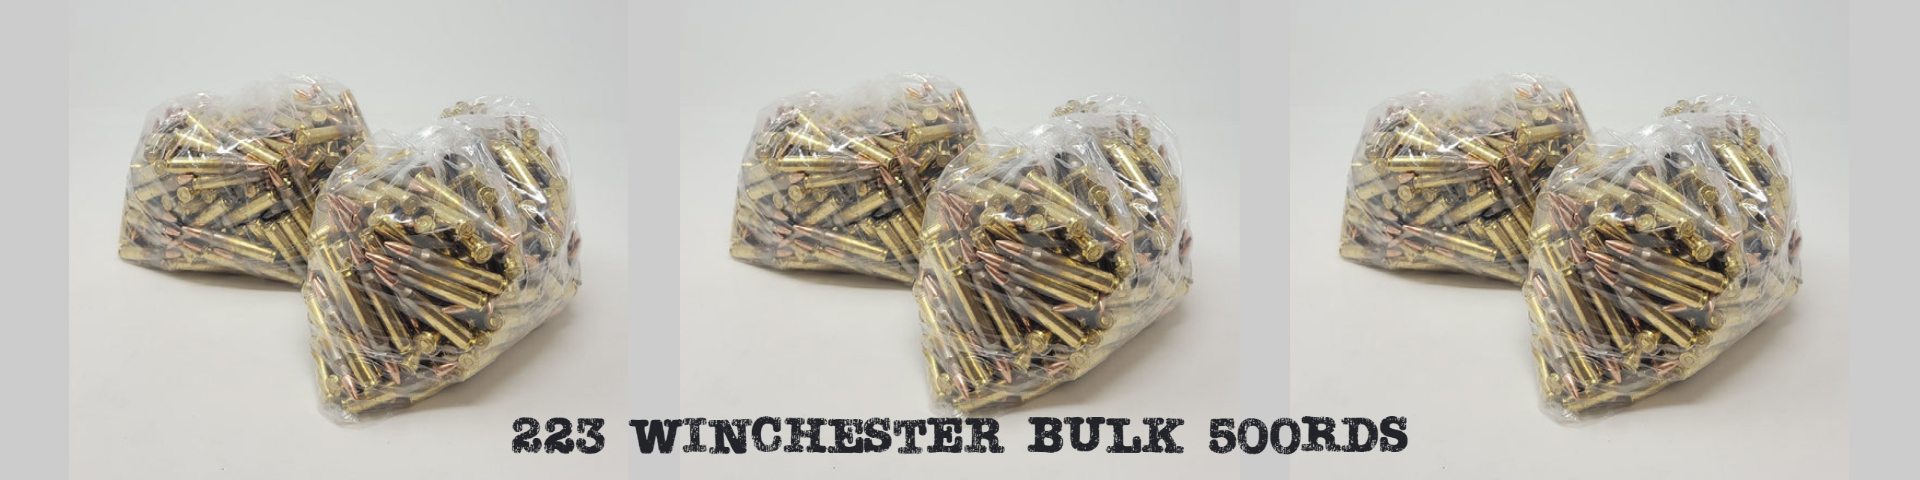 https://www.monkeyjunction-outdoors.com/products/winchester-ammo-w223bp500-w223bp500-4728